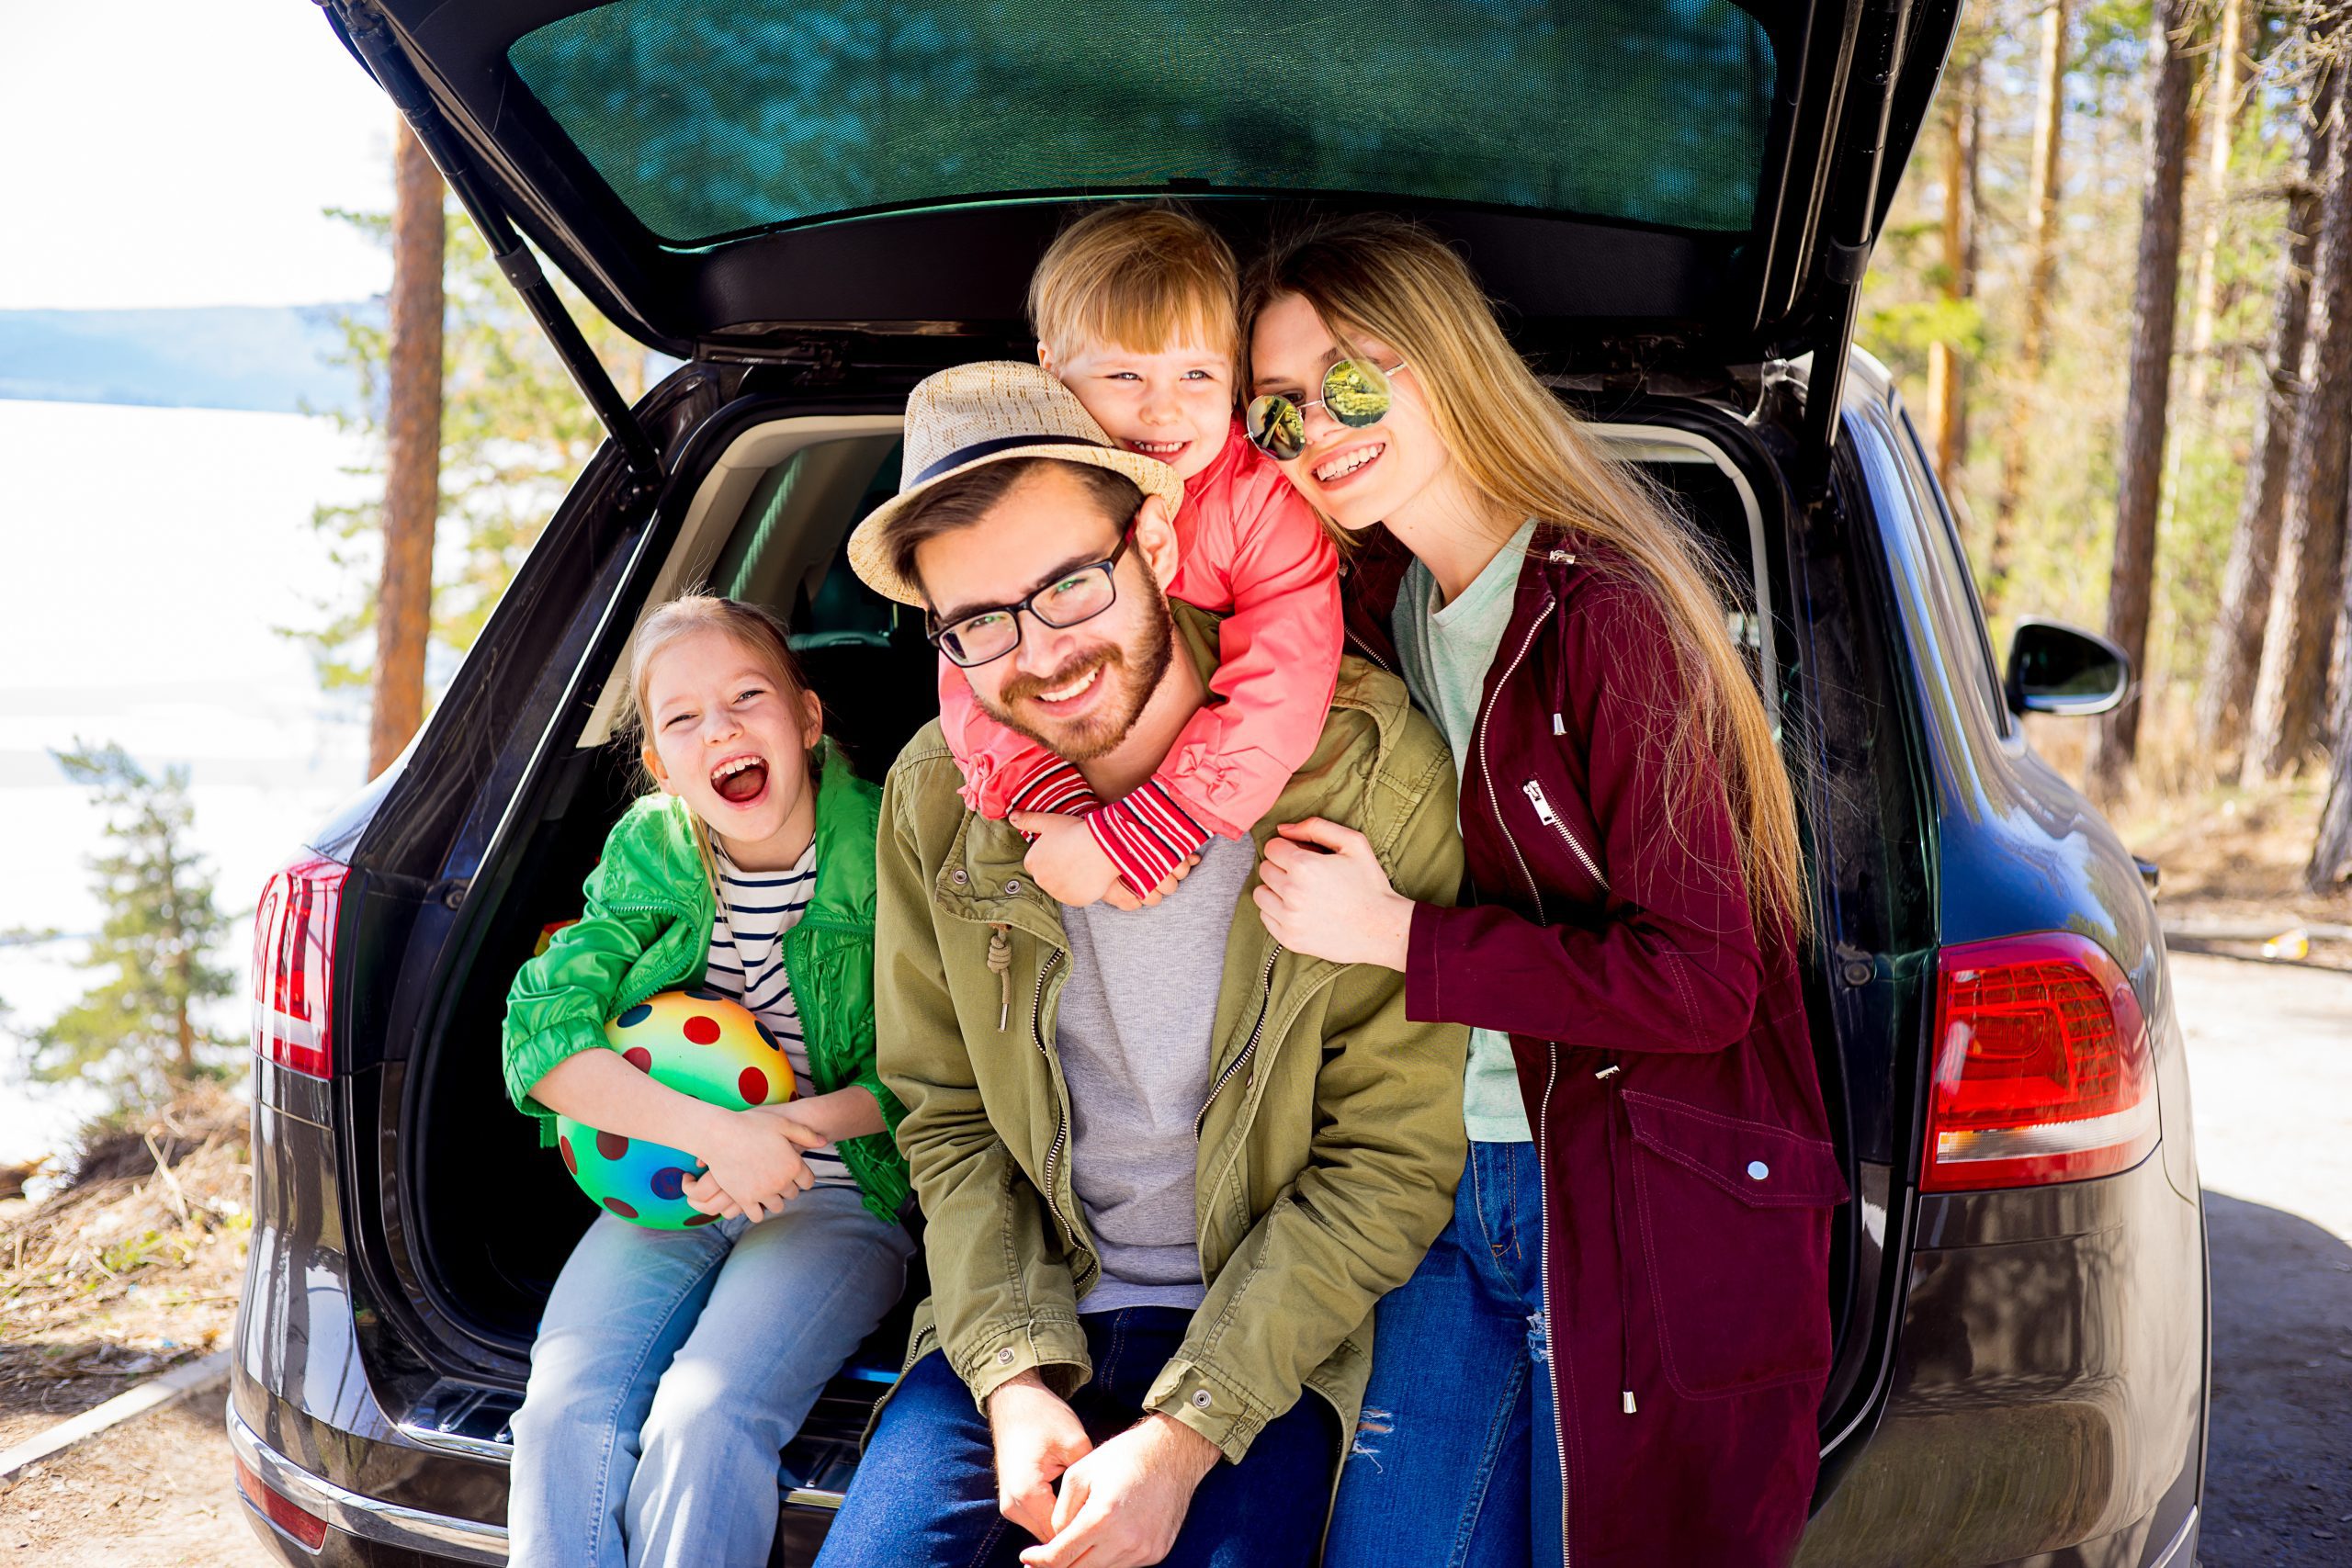 Tips for Keeping Your Family Safe on Road Trips